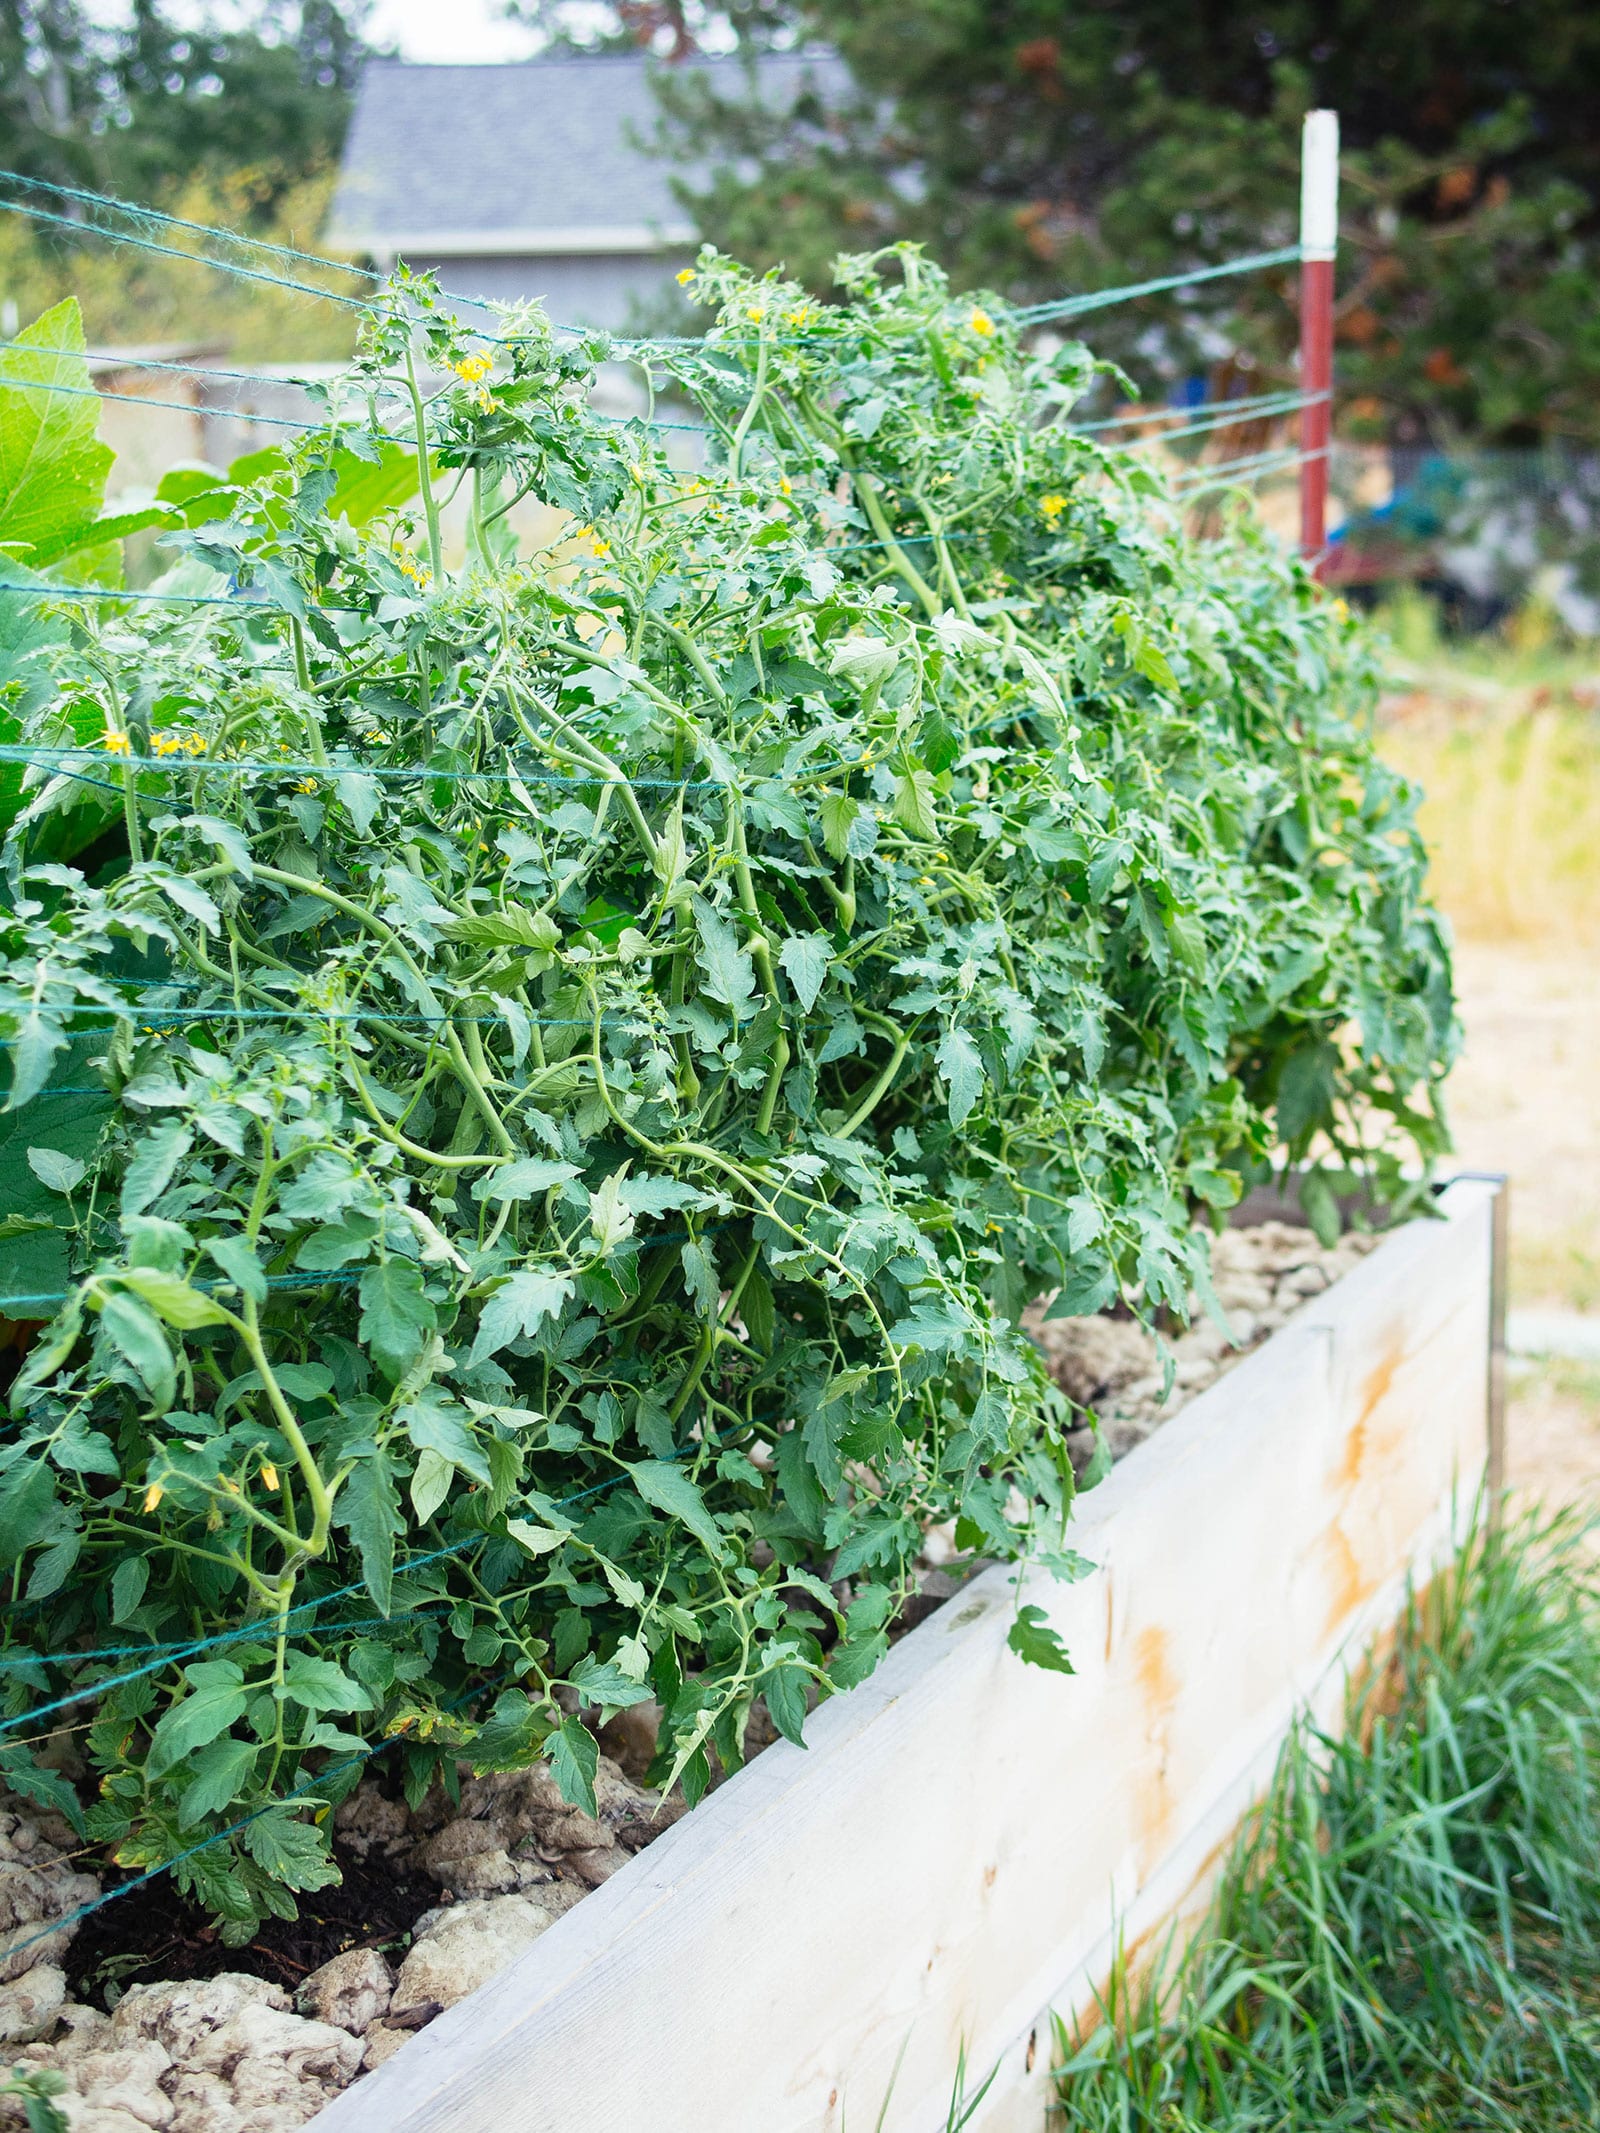 Large tomato plants trellised in a raised bed using the basket weave technique